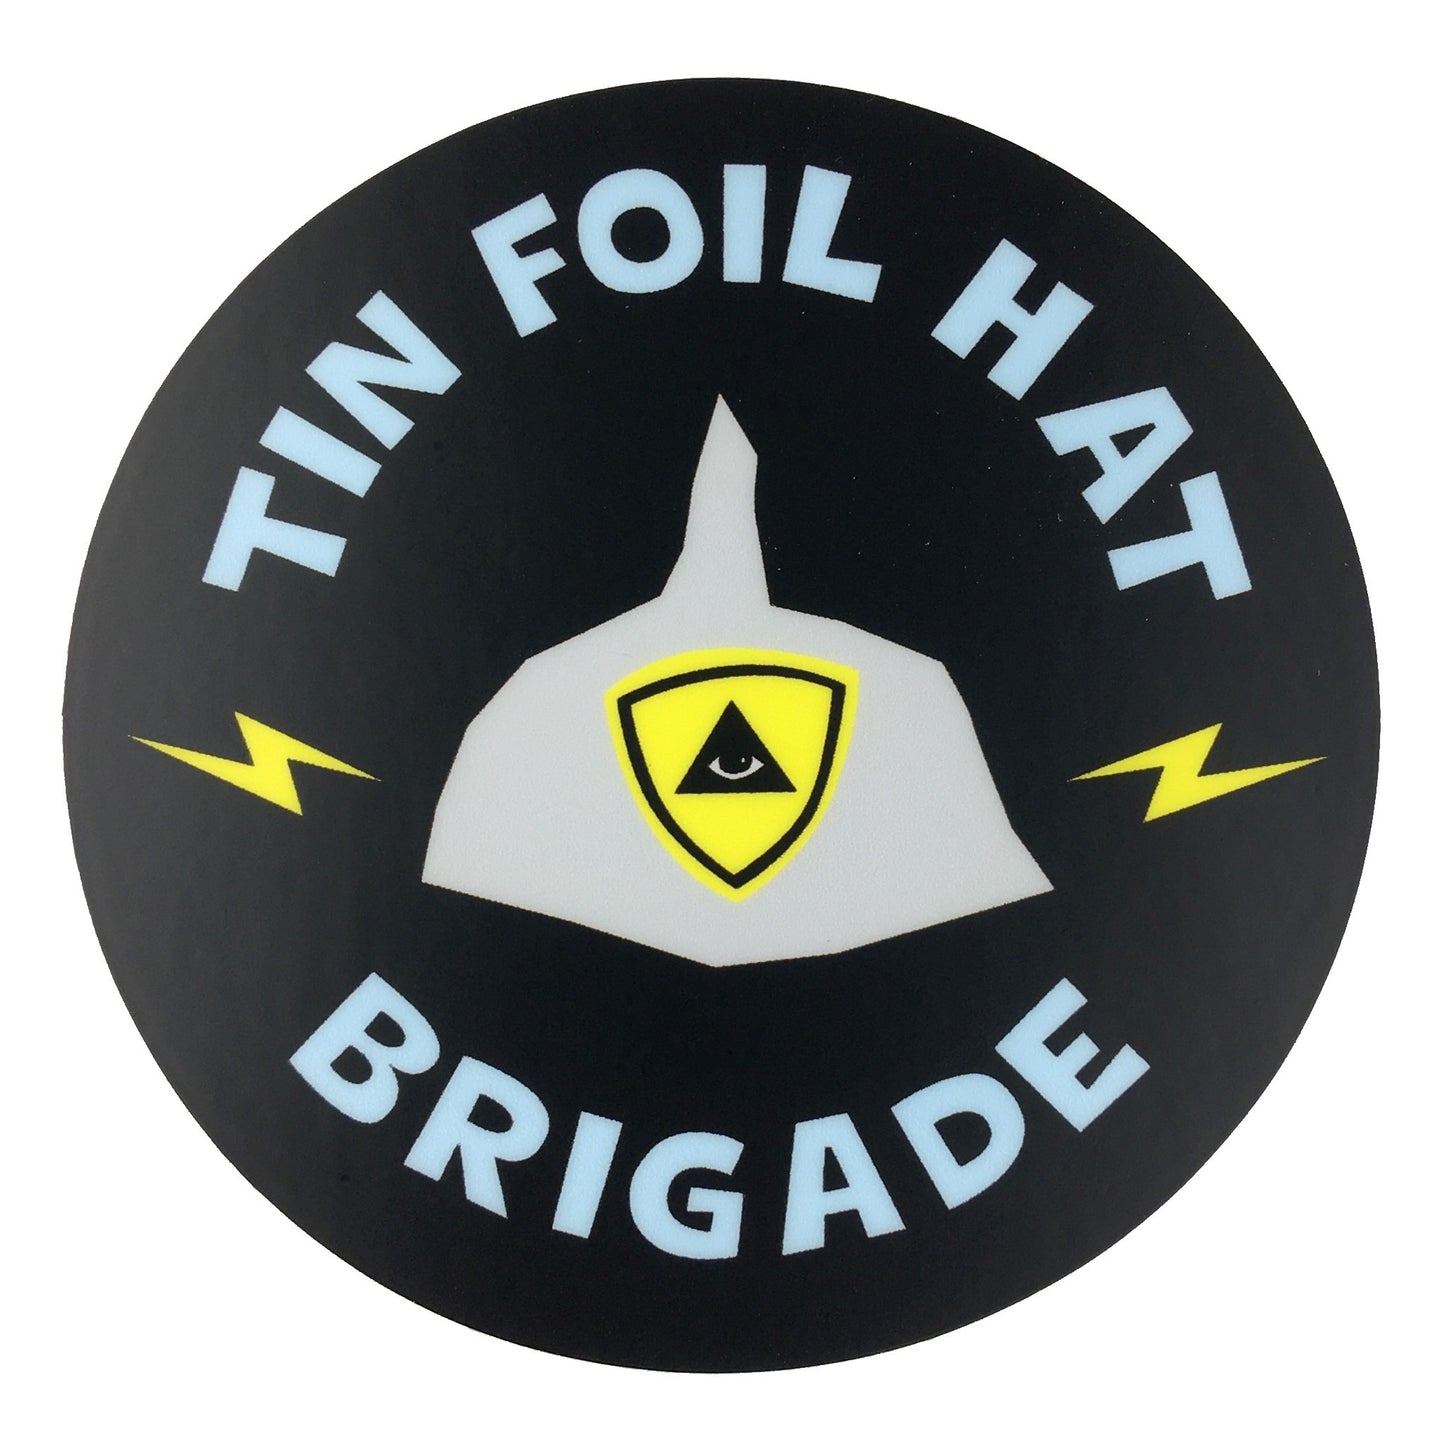 Tin Foil Hat Brigade funny conspiracy theory sticker